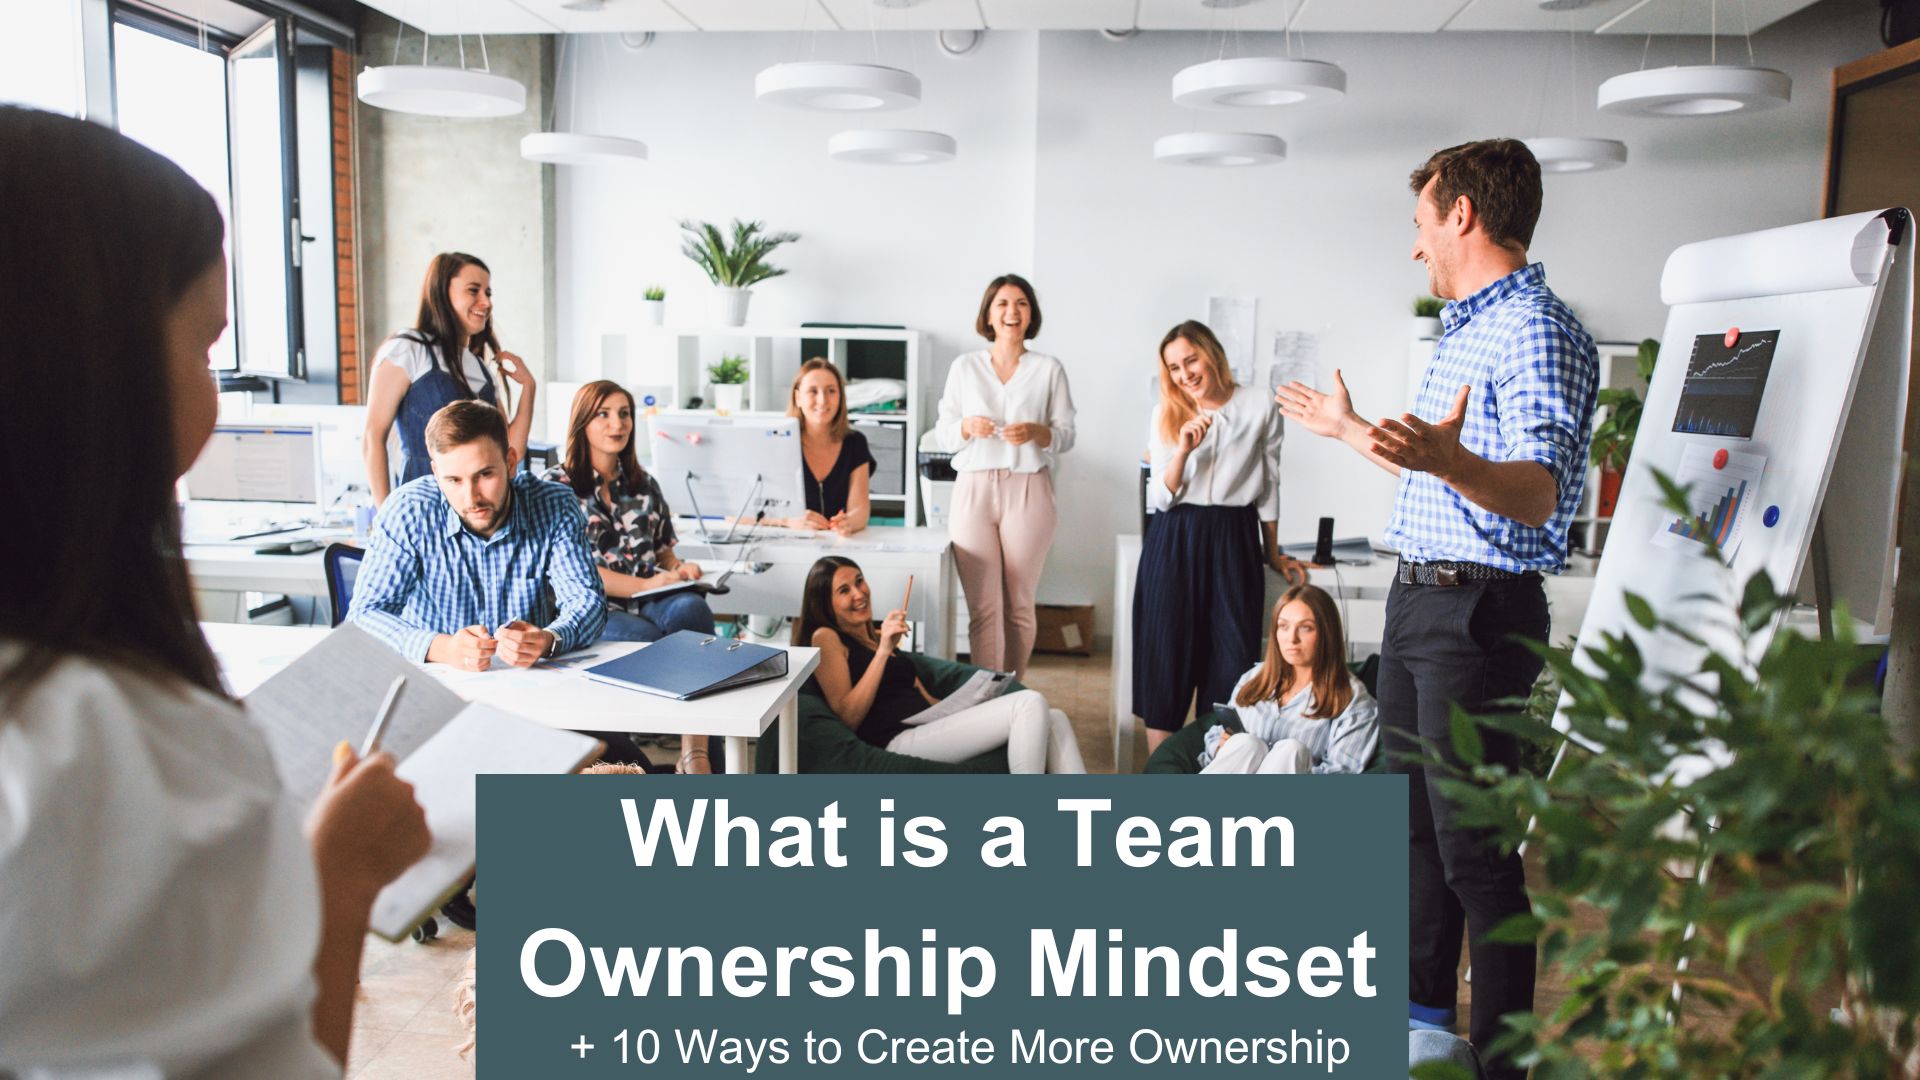 What Is Team Ownership Mindset plus 10 ways to create more ownership